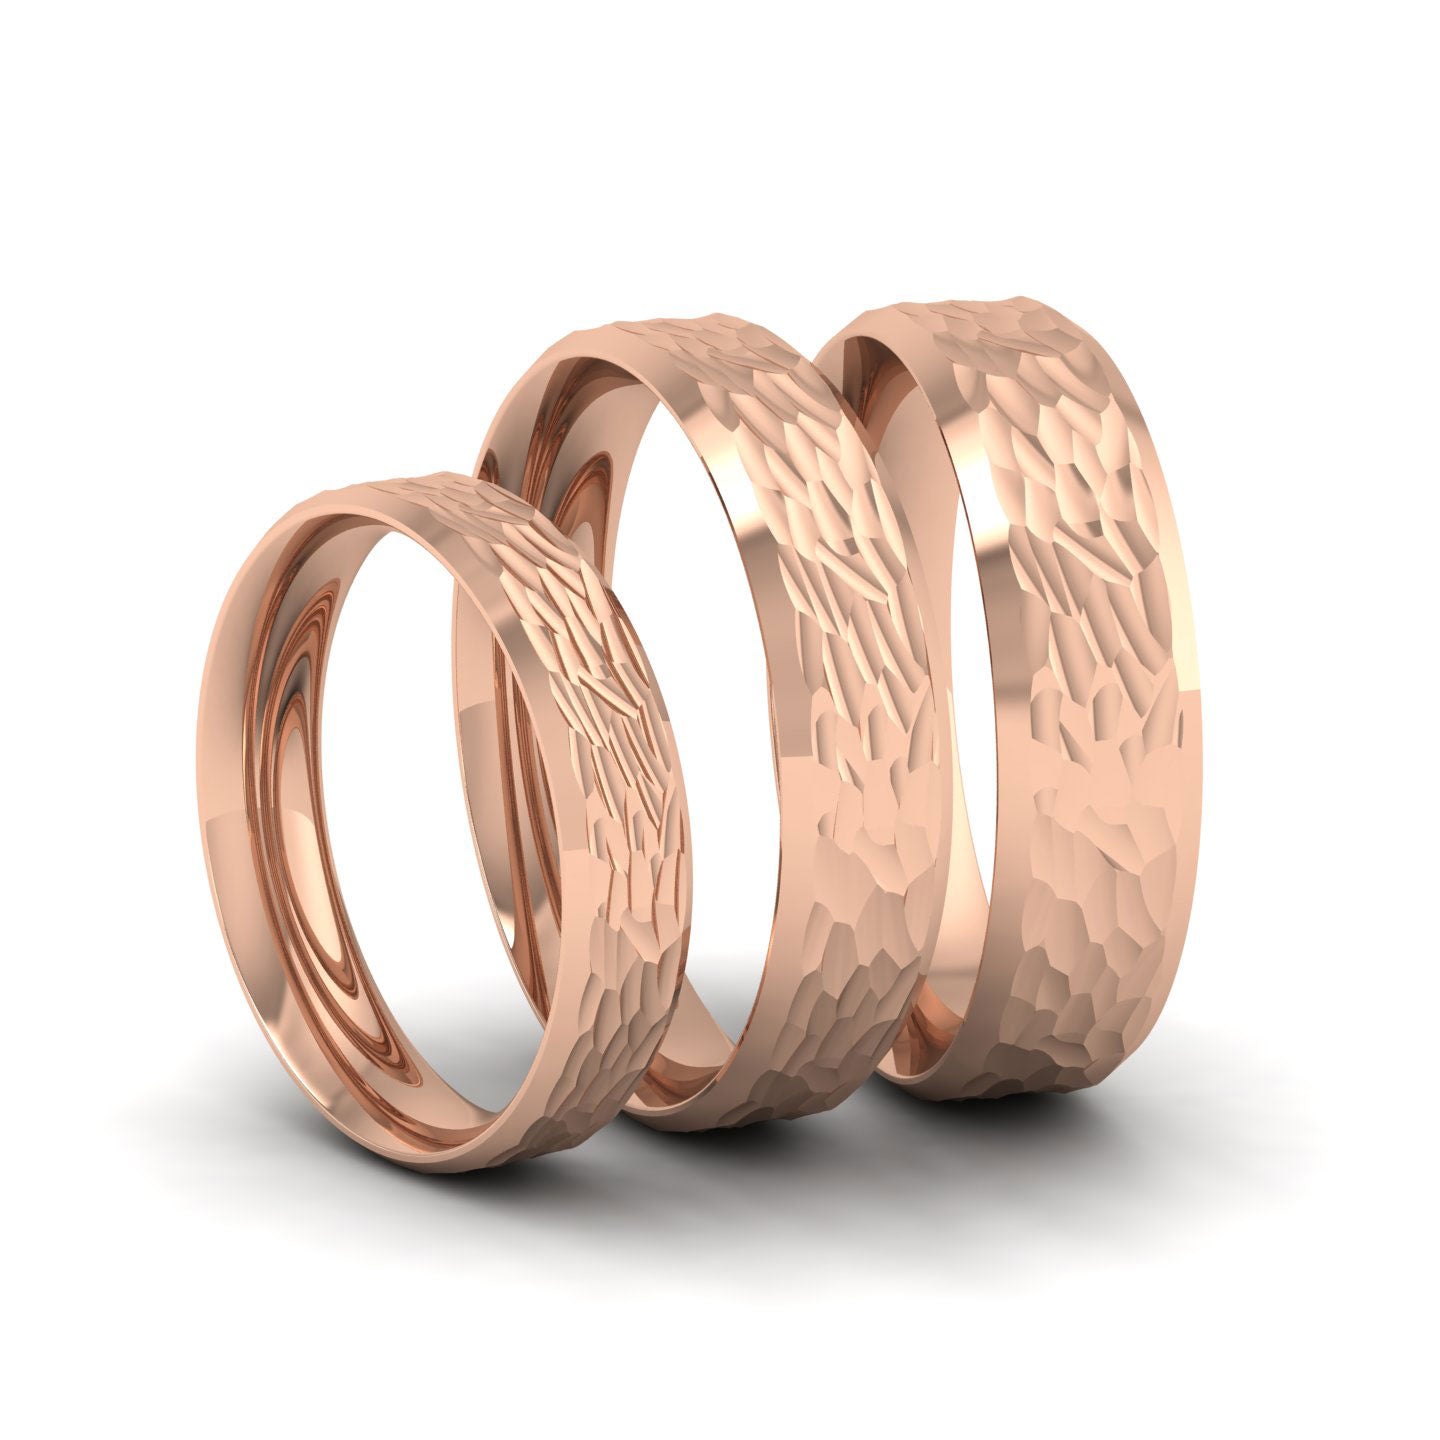 Bevelled Edge And Hammered Centre 18ct Rose Gold 5mm Wedding Ring